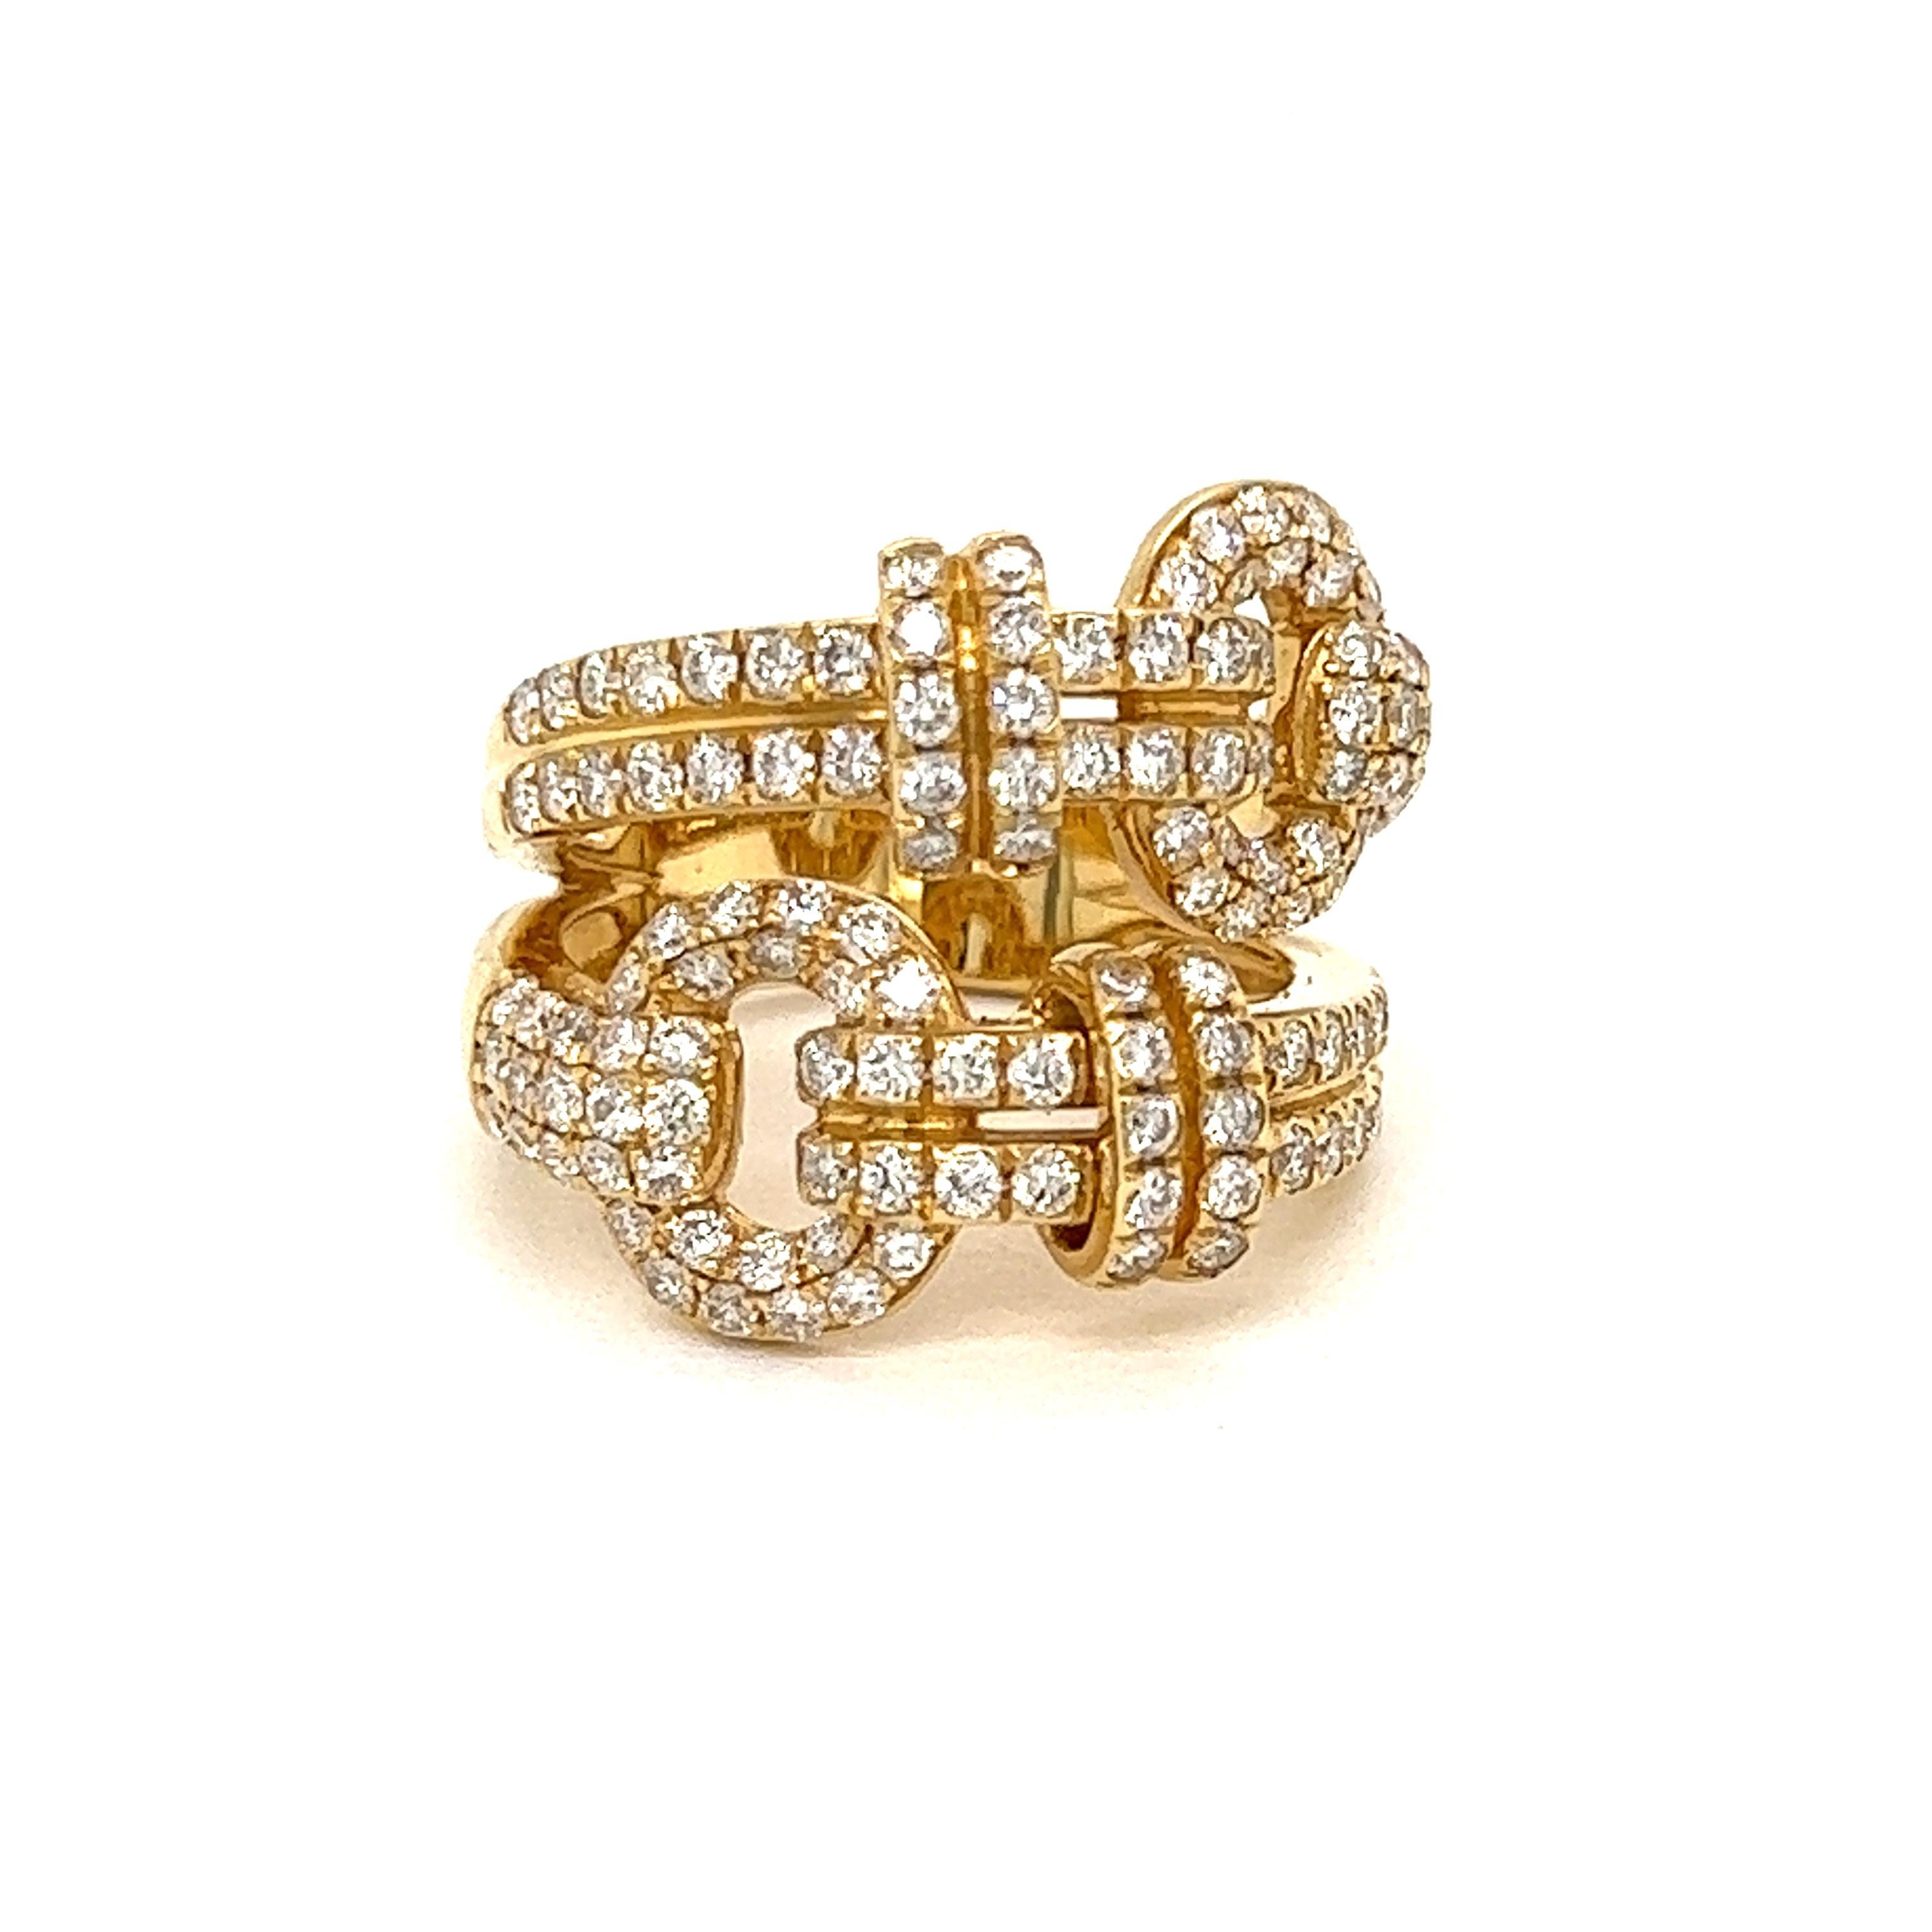 Enjoy the sparkle on this buckle style diamond ring.  1.55 cttw of round diamonds, a total of 130 diamonds.  This ring is set in 7.40 grams of 18k yellow gold. SI Clarity, G-H Color 

This is a brand new item and is presented in a gift box.